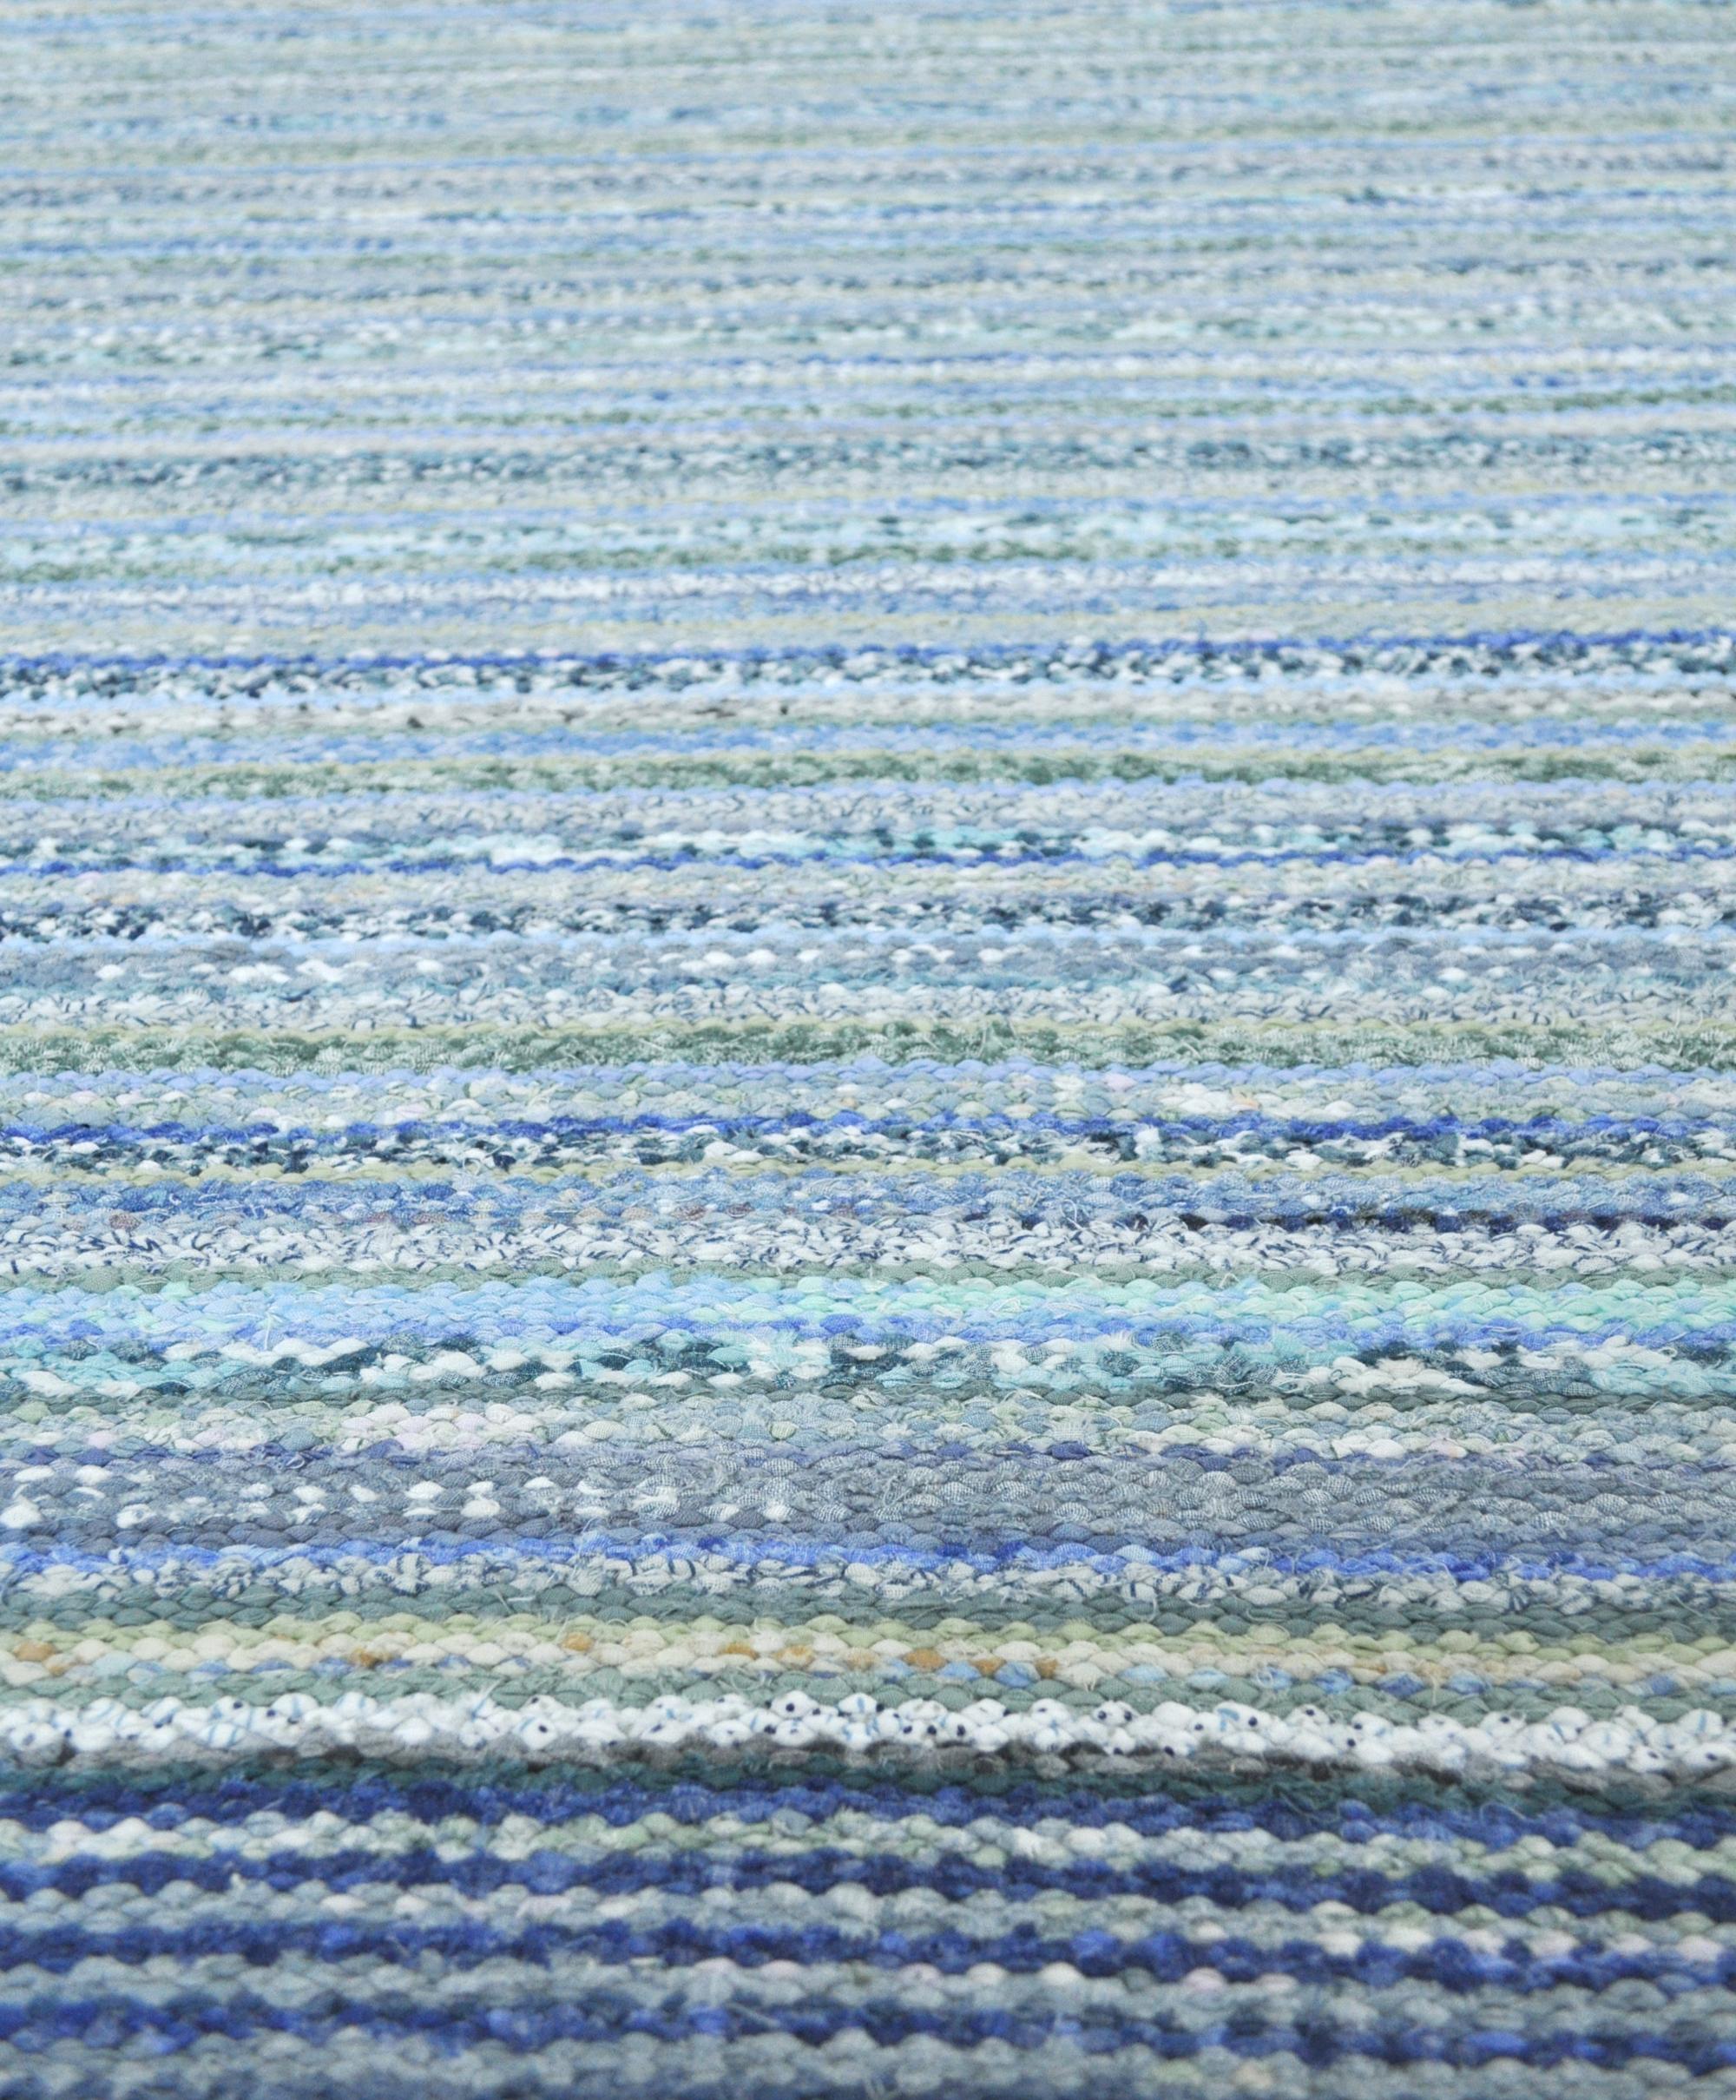 Stained Contemporary Unique Handwoven Danish Rug in Recycled Materials